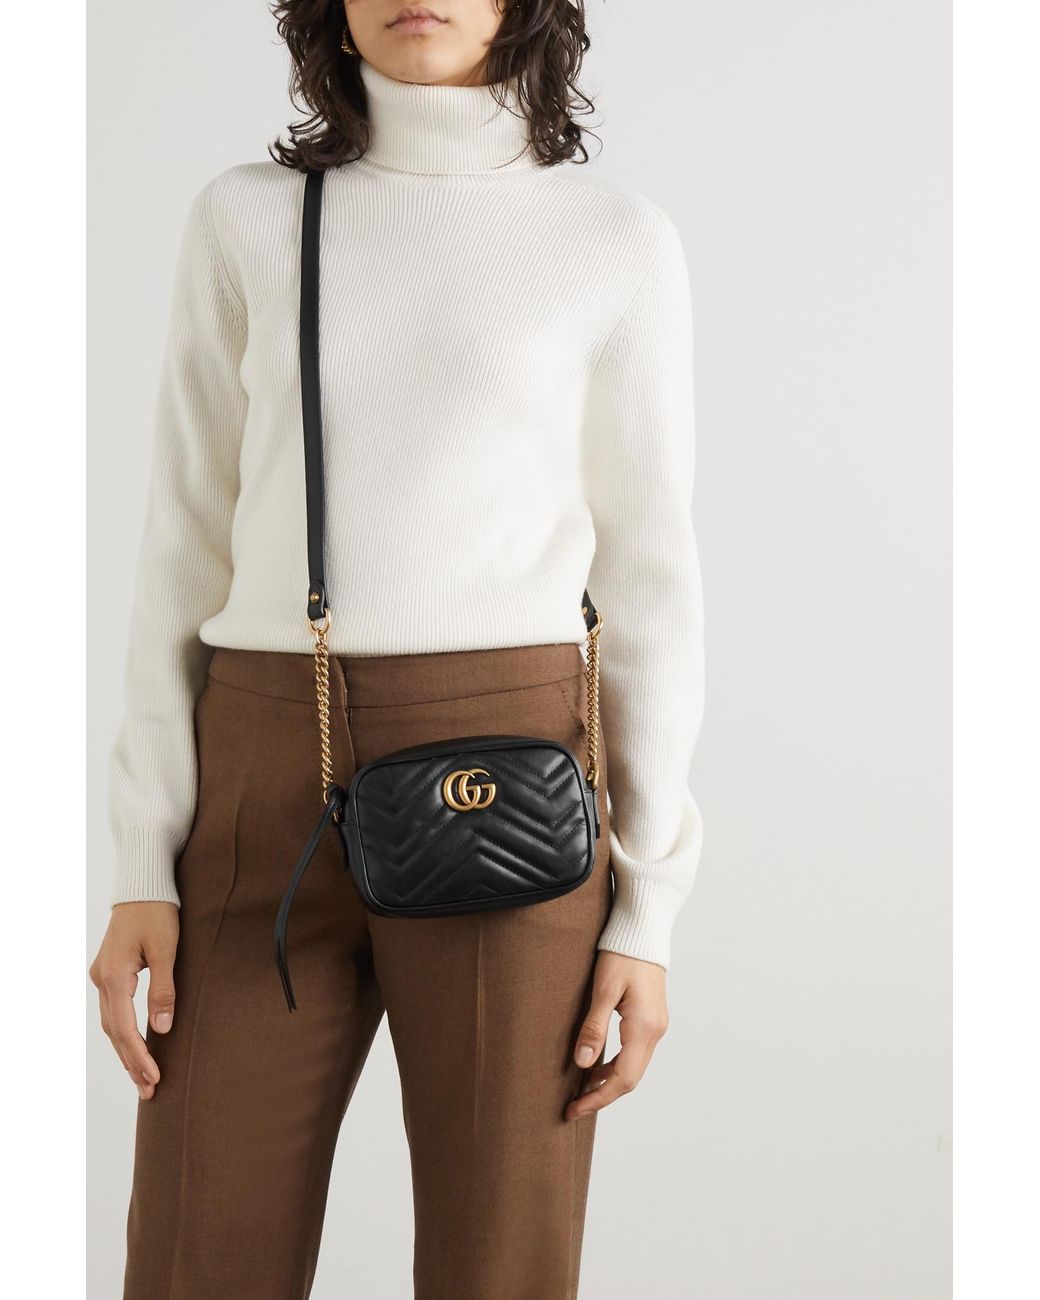 Gucci Gg Marmont Camera Mini Quilted Leather Shoulder Bag in Black | Lyst